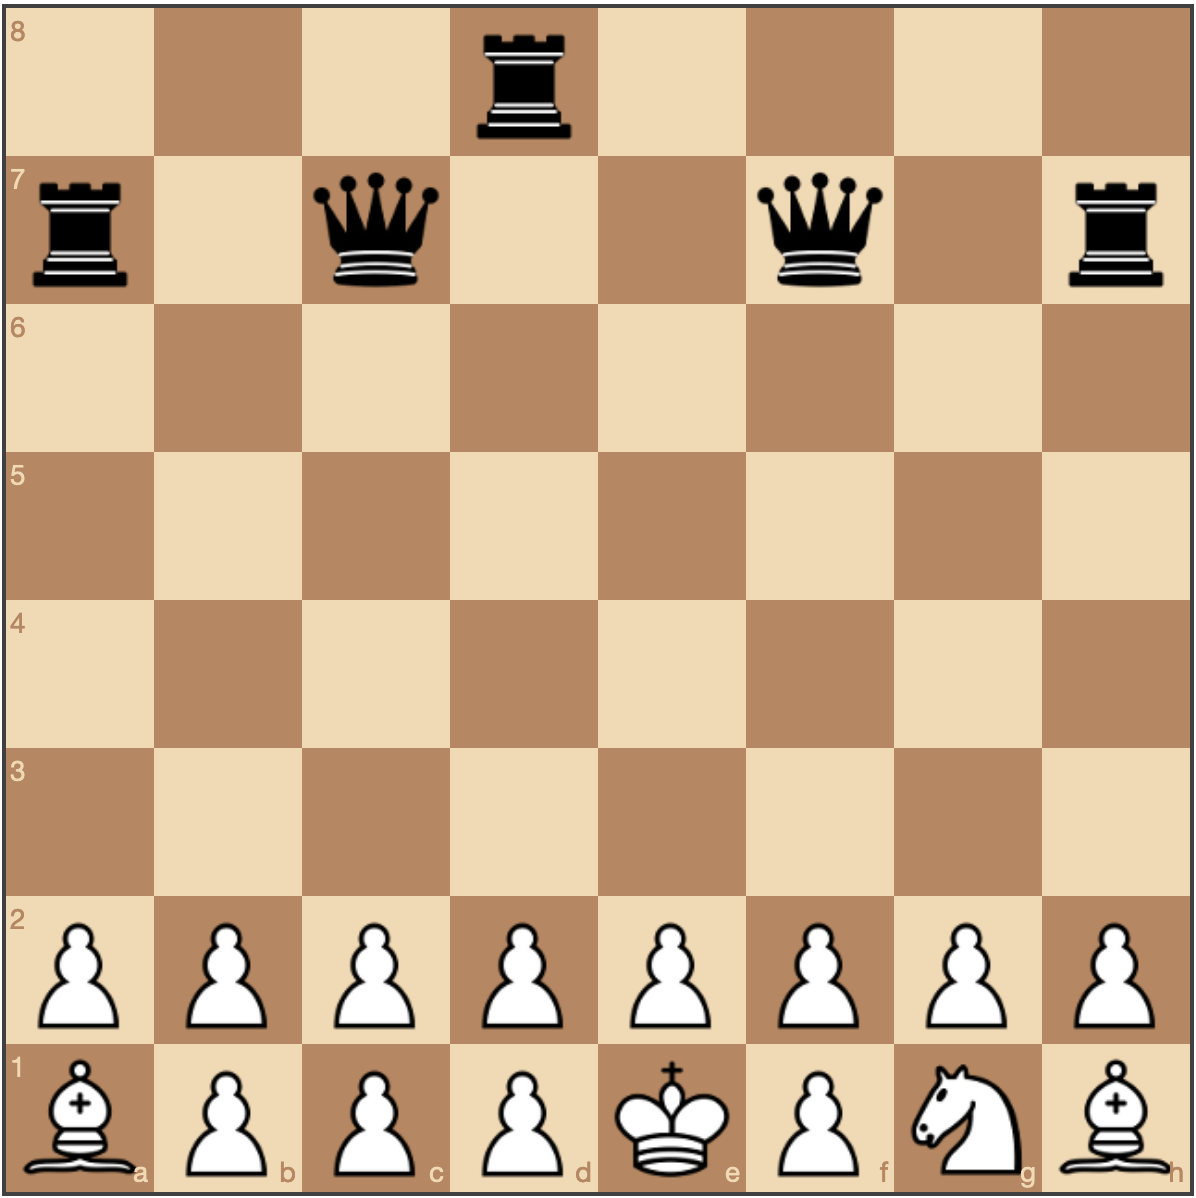 Partial view of chessboard from white player’s perspective